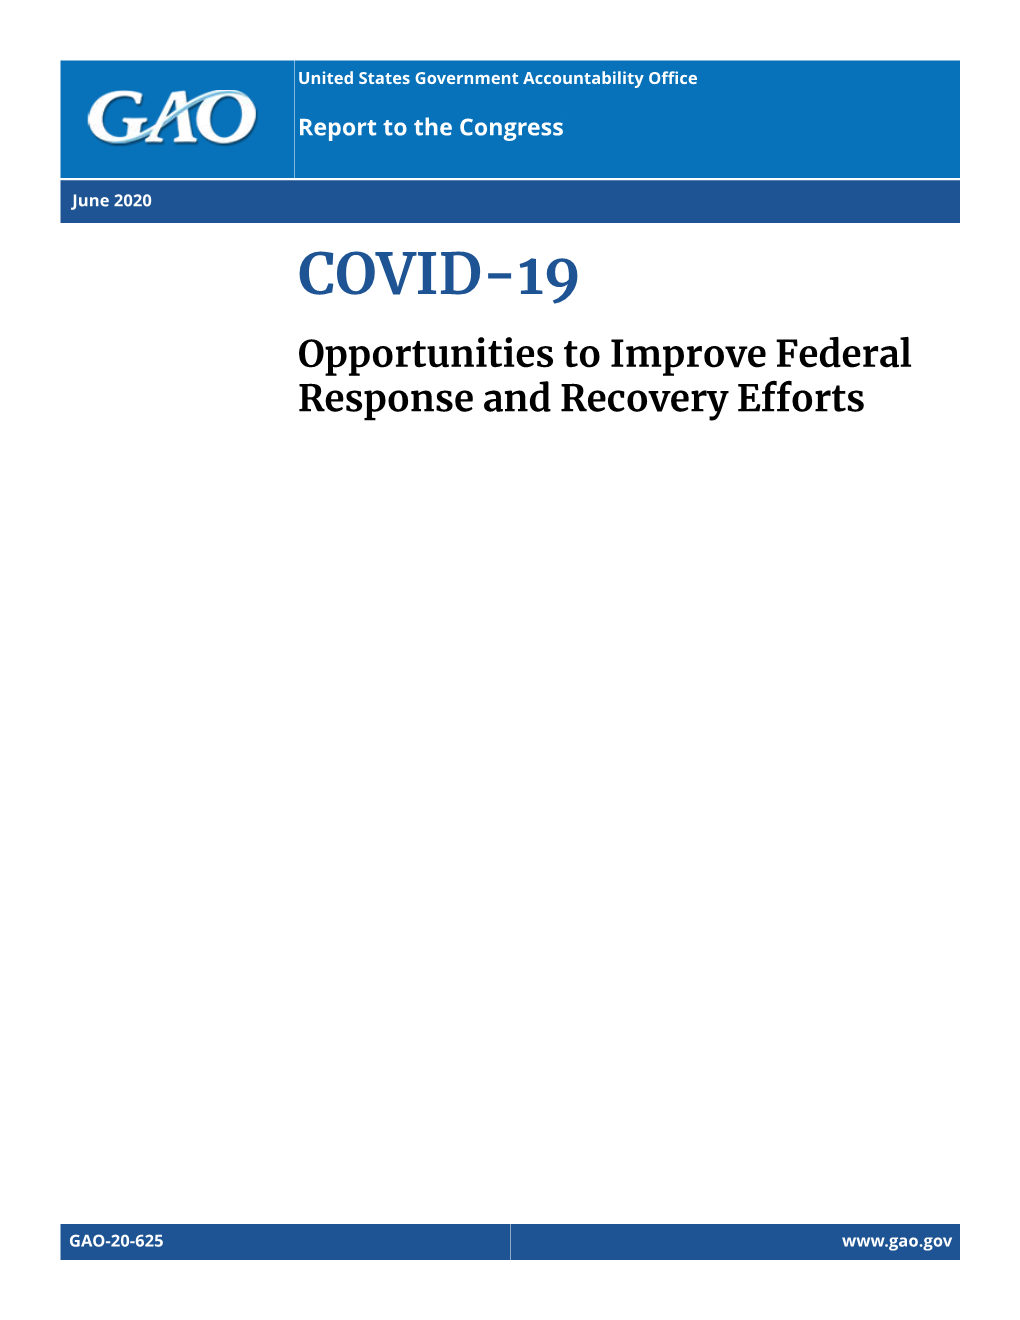 GAO-20-625, COVID-19: Opportunities to Improve Federal Response and Recovery Efforts